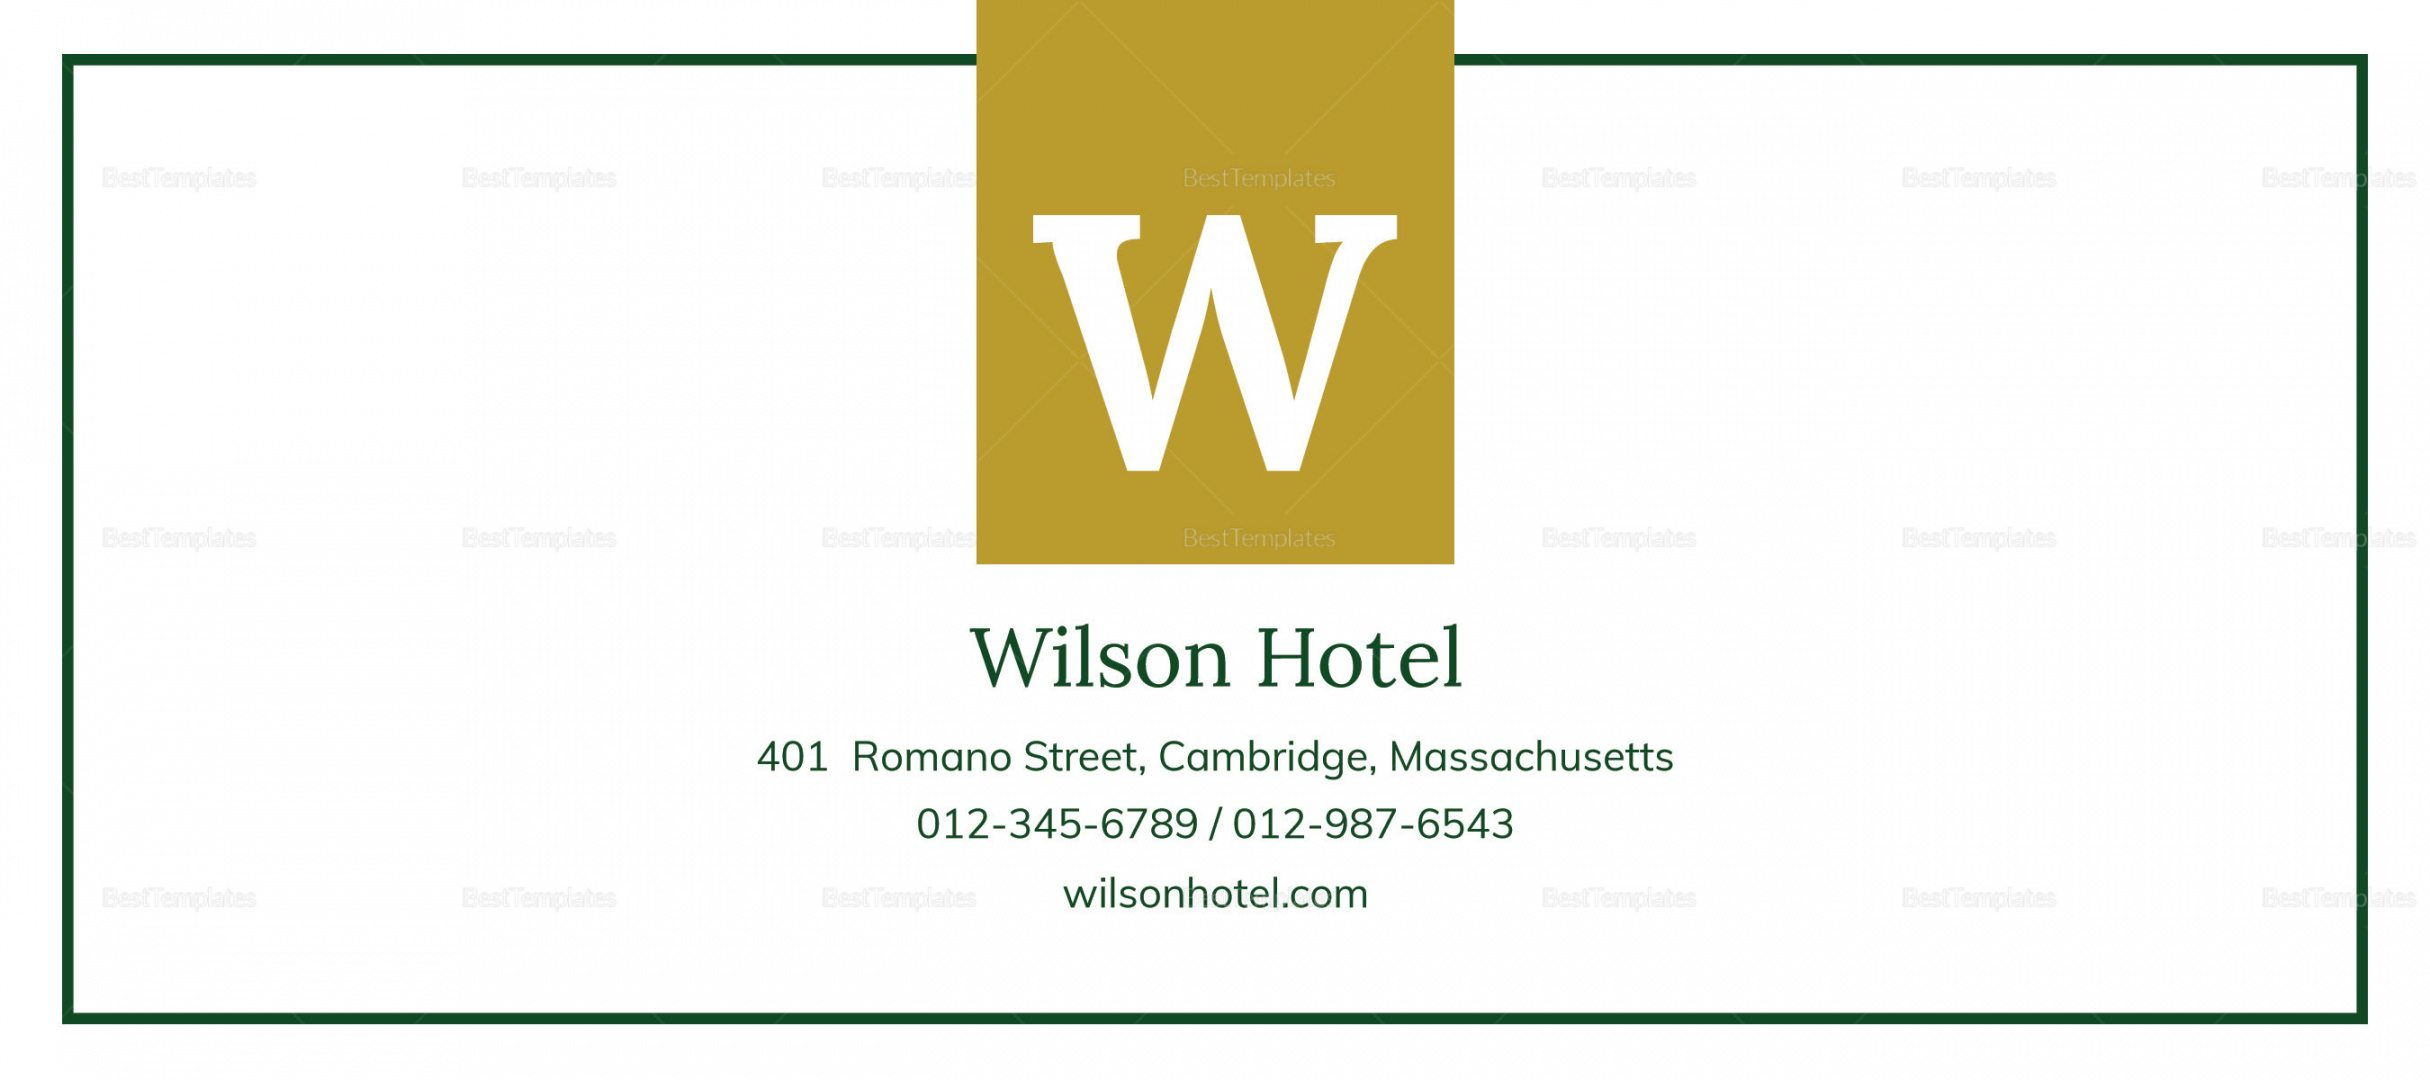 Free Hotel Gift Certificate Design Template In Psd Word Pertaining To Publisher Gift Certificate Template